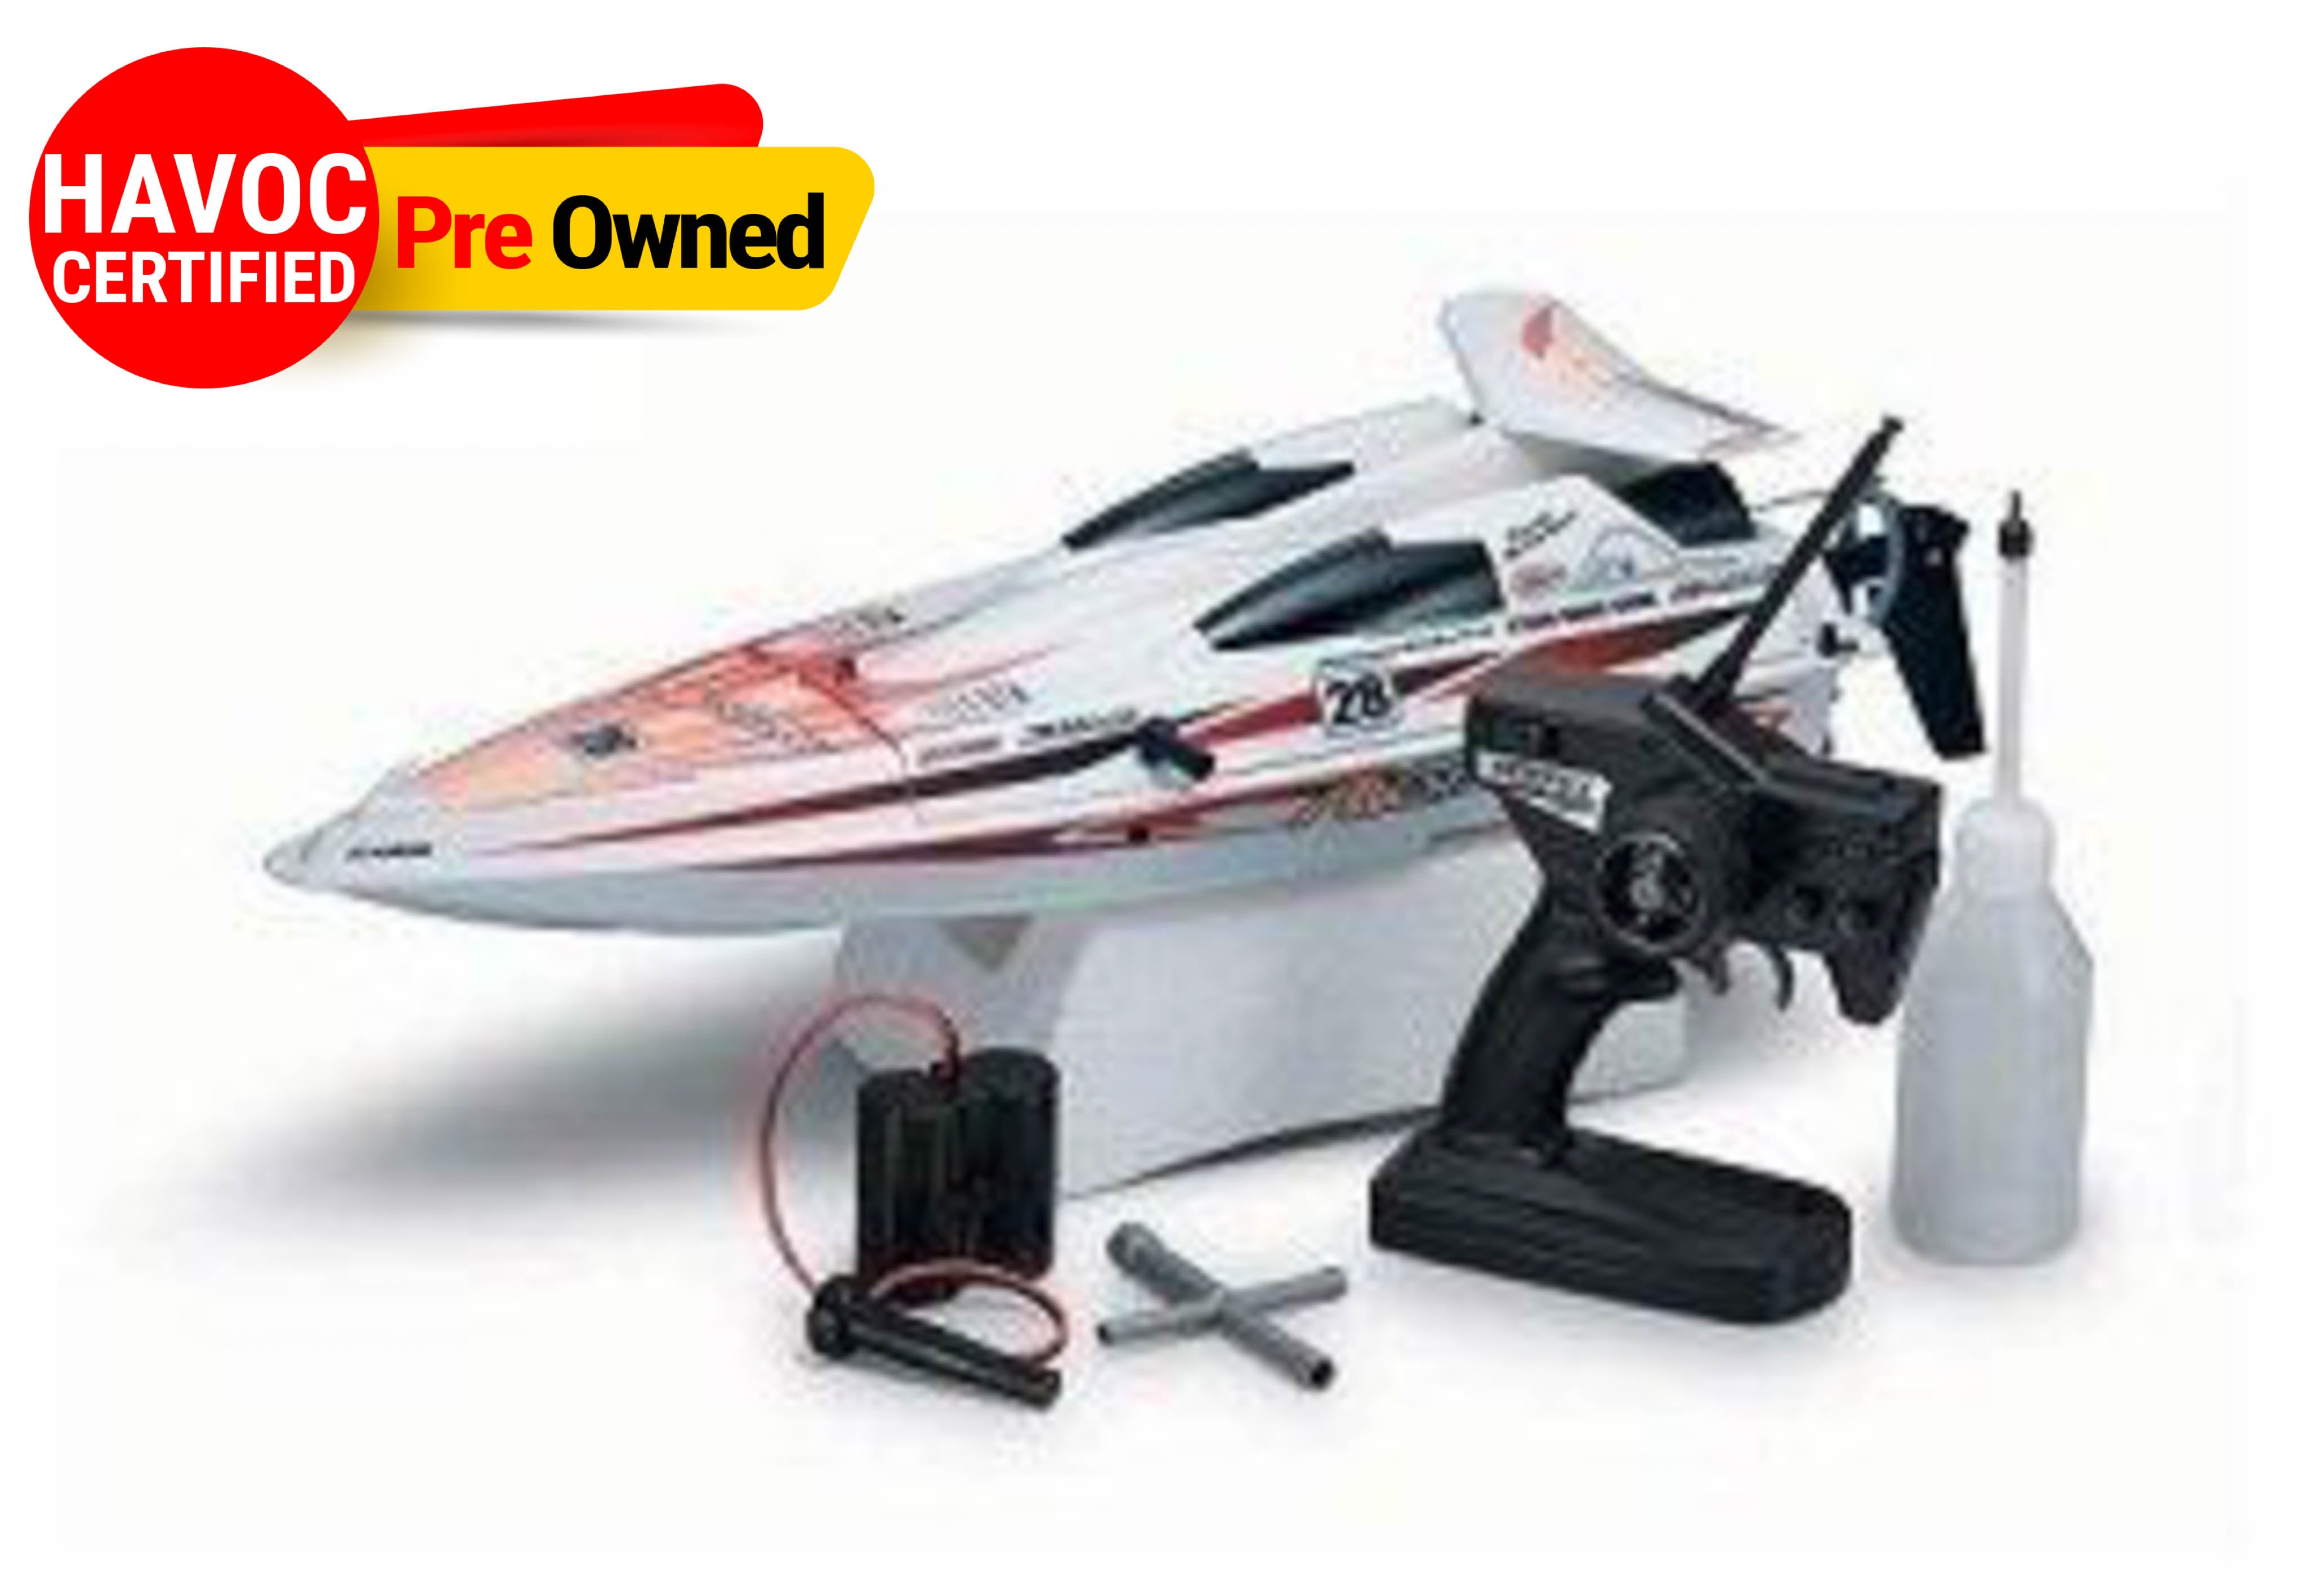 KYOSHO BOAT AIRSTREAK 500 READYSET-QUALITY PRE OWNED